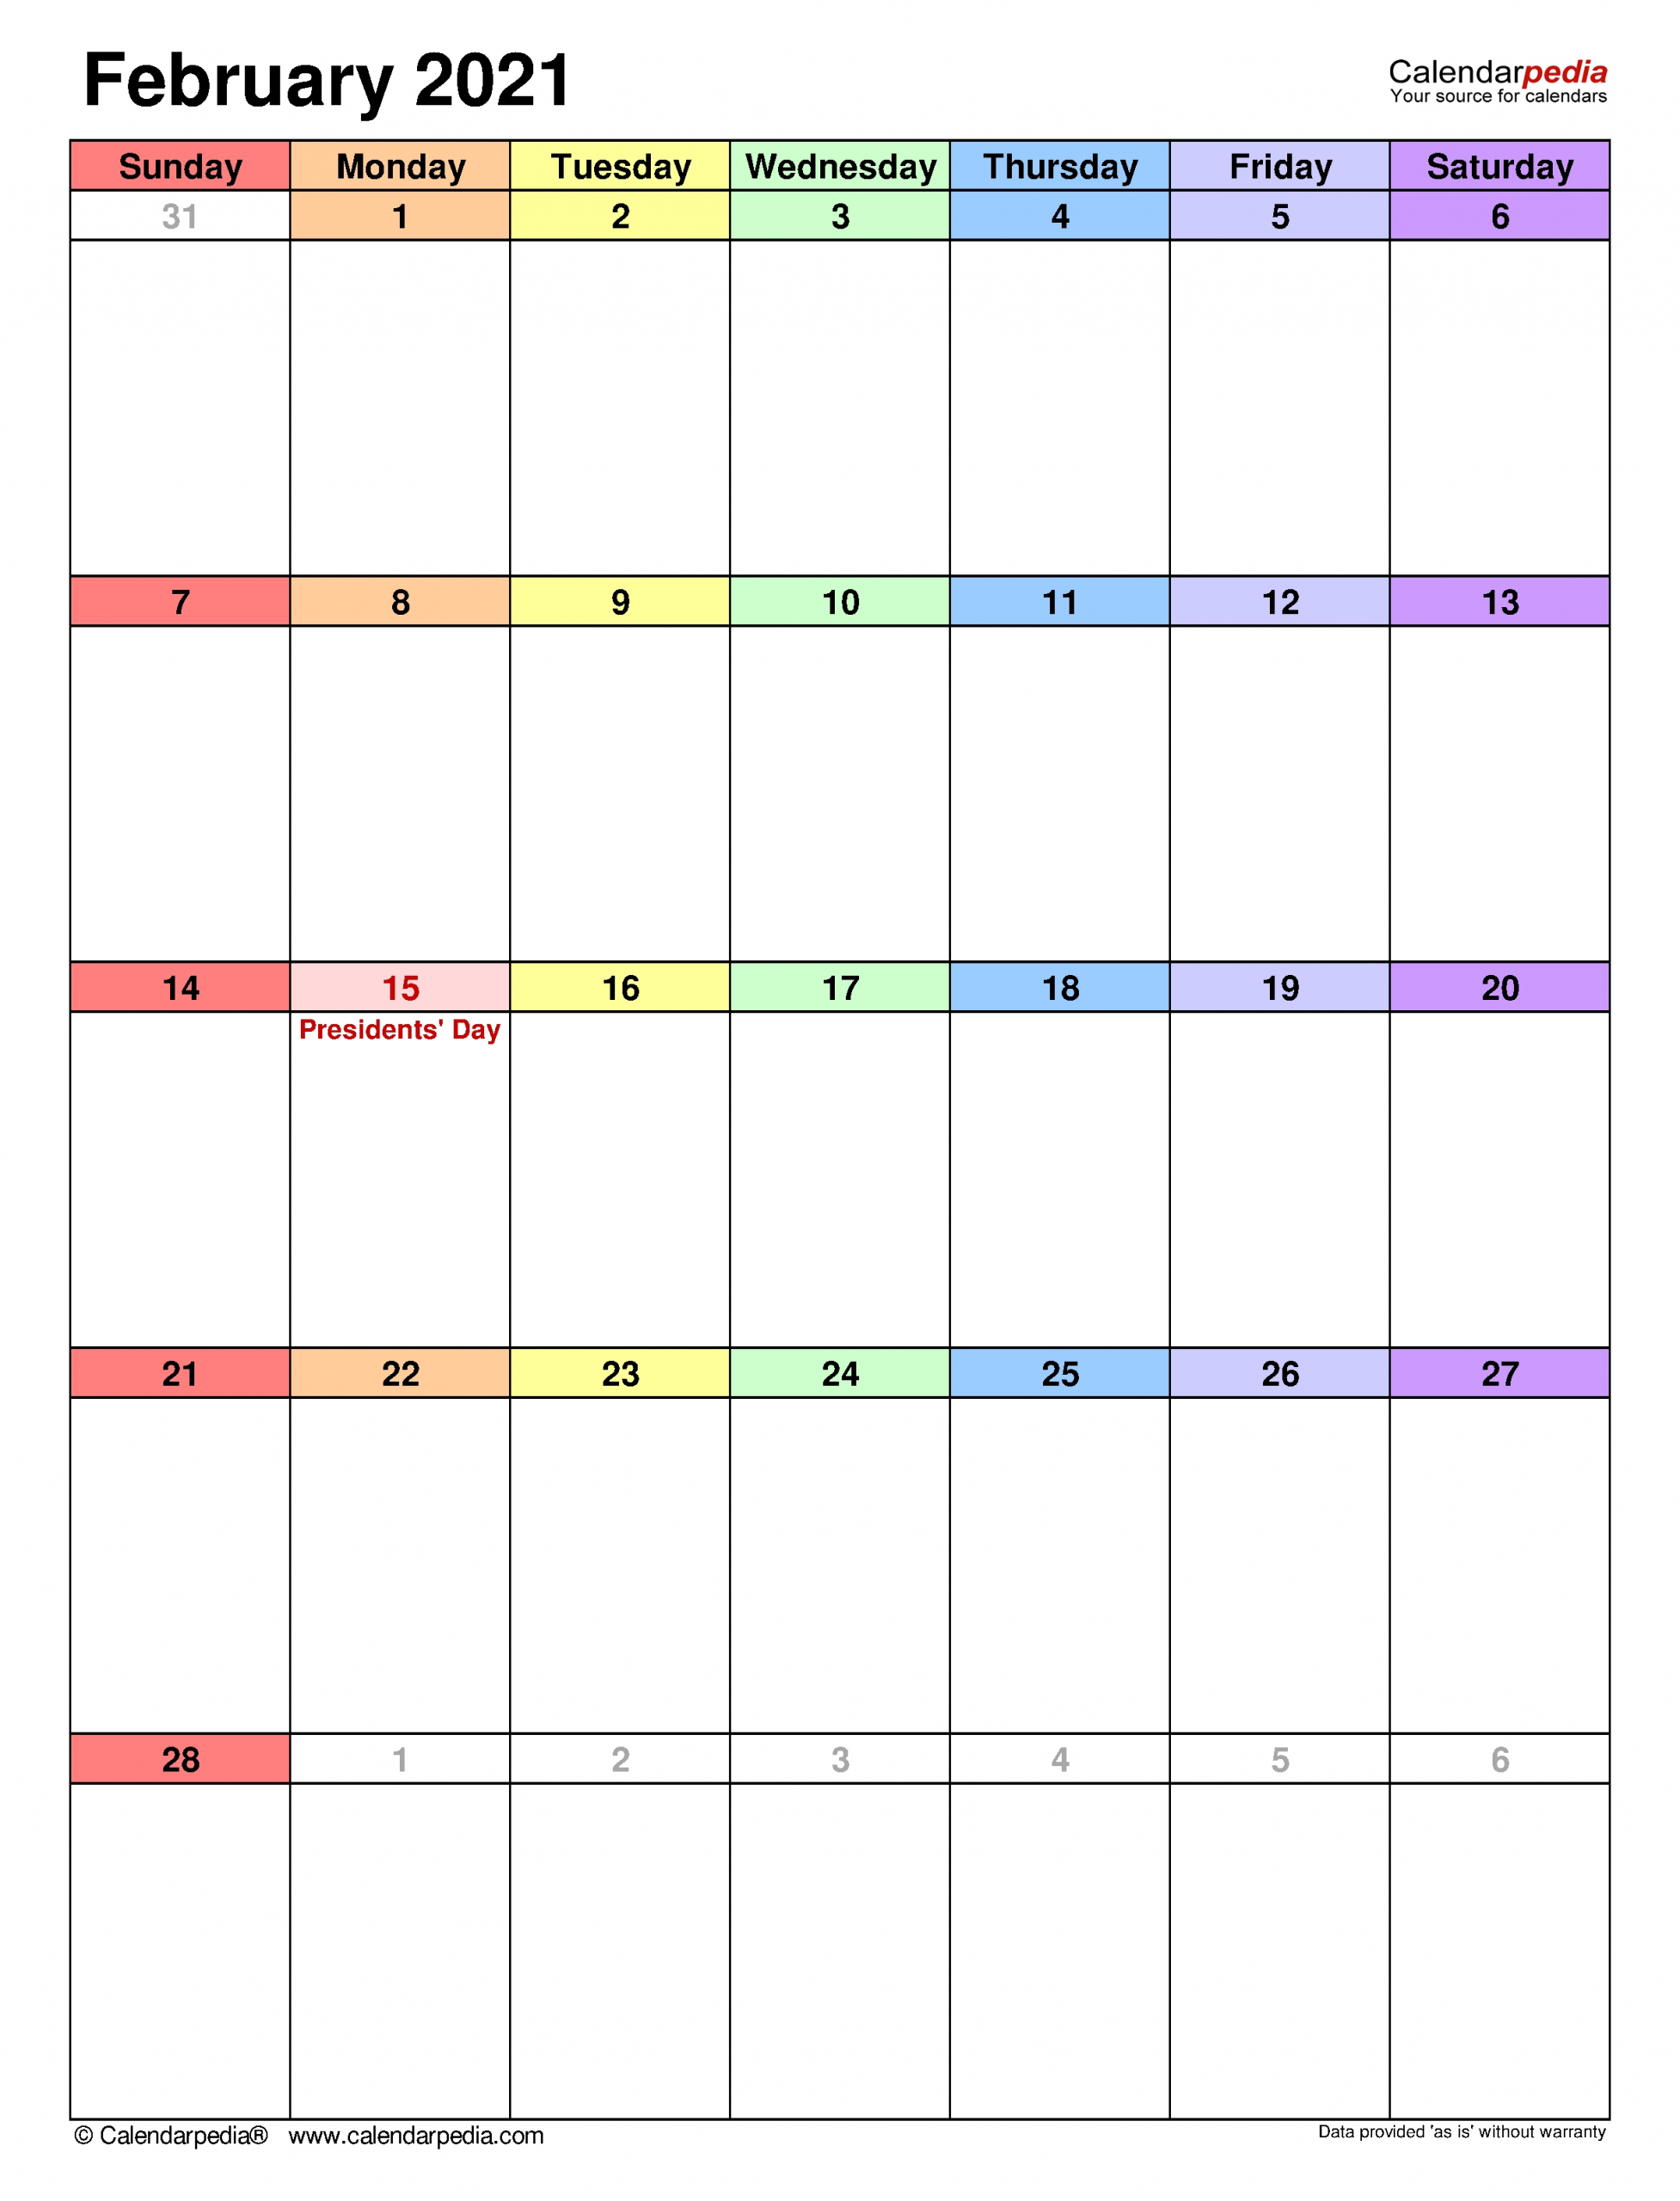 February 2021 Calendar | Templates For Word, Excel And Pdf